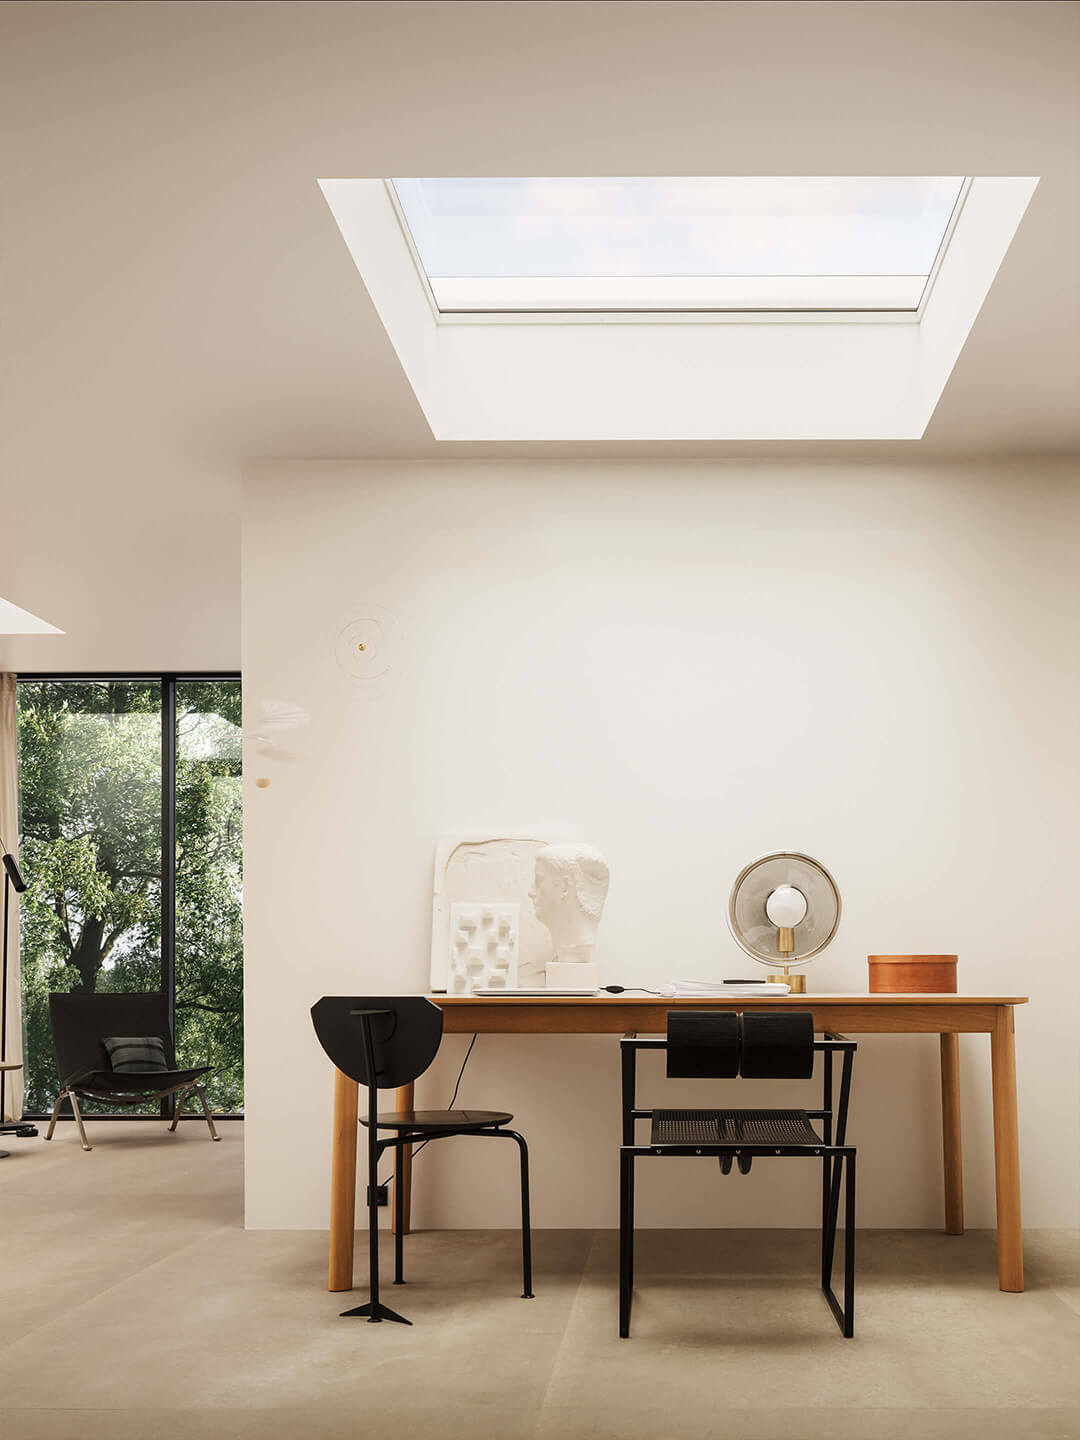 VELUX flat glass rooflight installed above a writing table